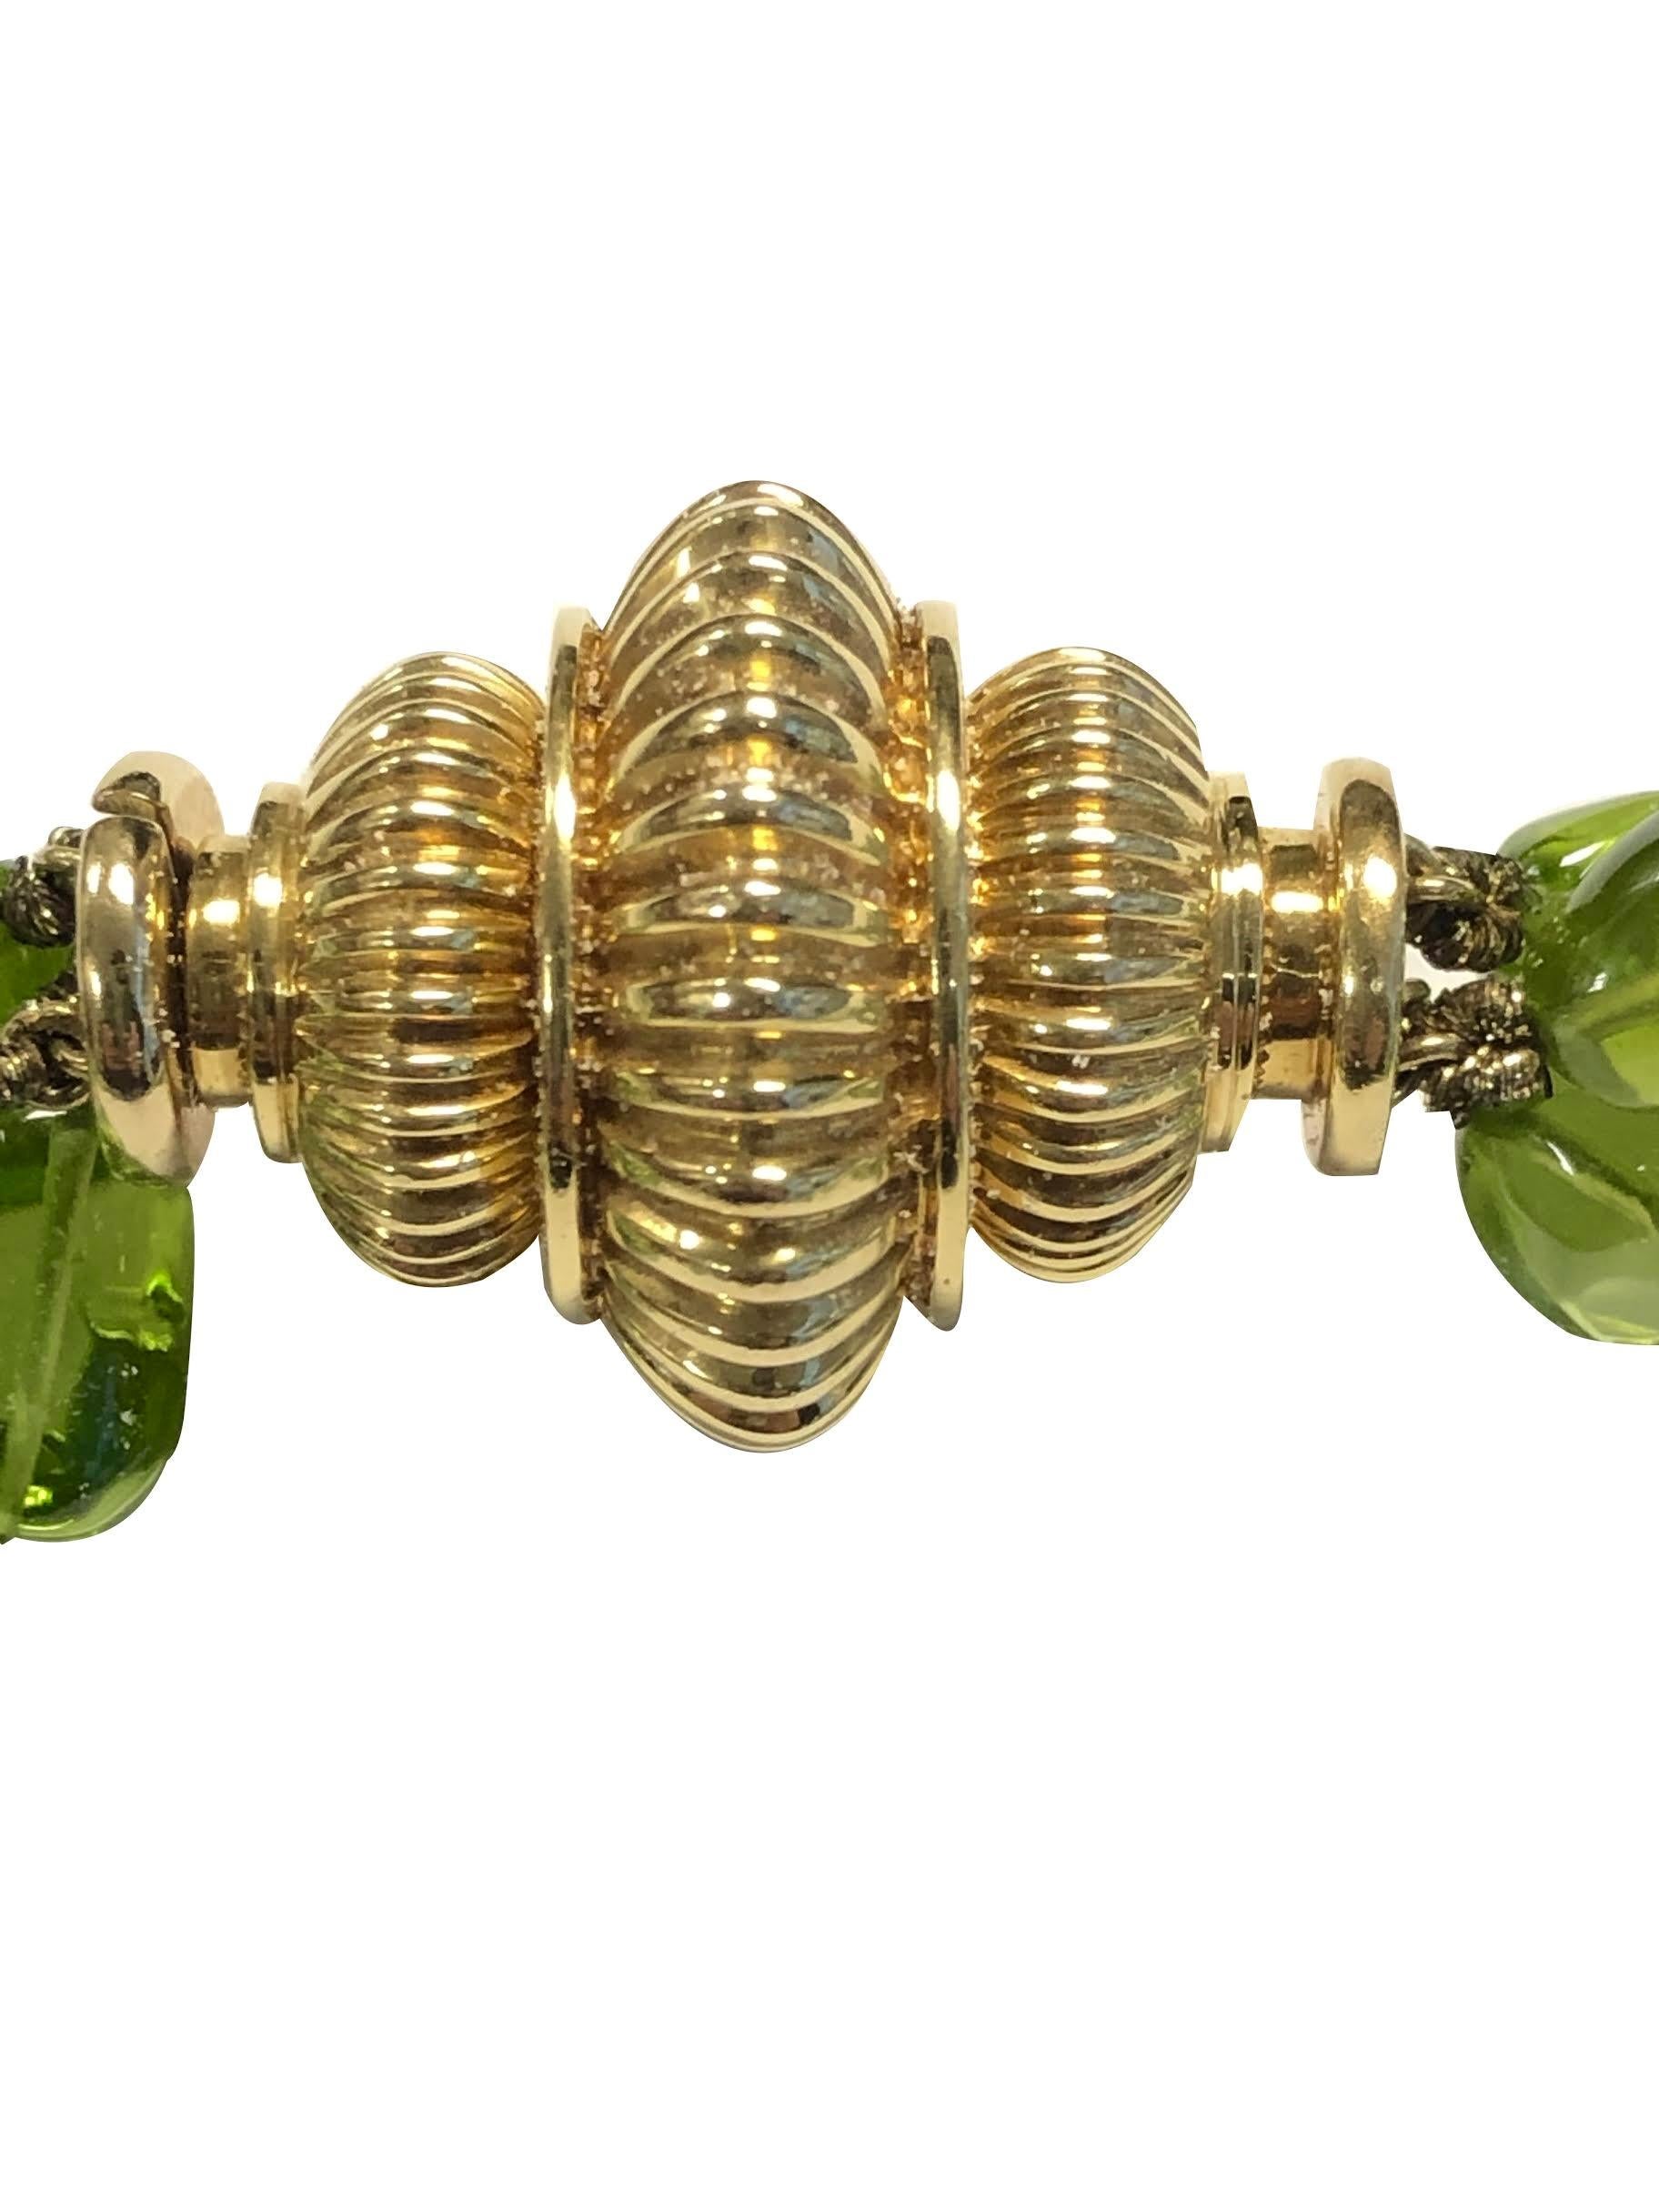 Circa 2000 Verdura Triple Strand Peridot Necklace, Gem color Polished Peridots measuring on the average 12 X 9 m.m. Each of the 3 strands varies in length with the longest being 32 inches. A large Fluted 18k Yellow Gold clasp measuring 1 1/4 X 1